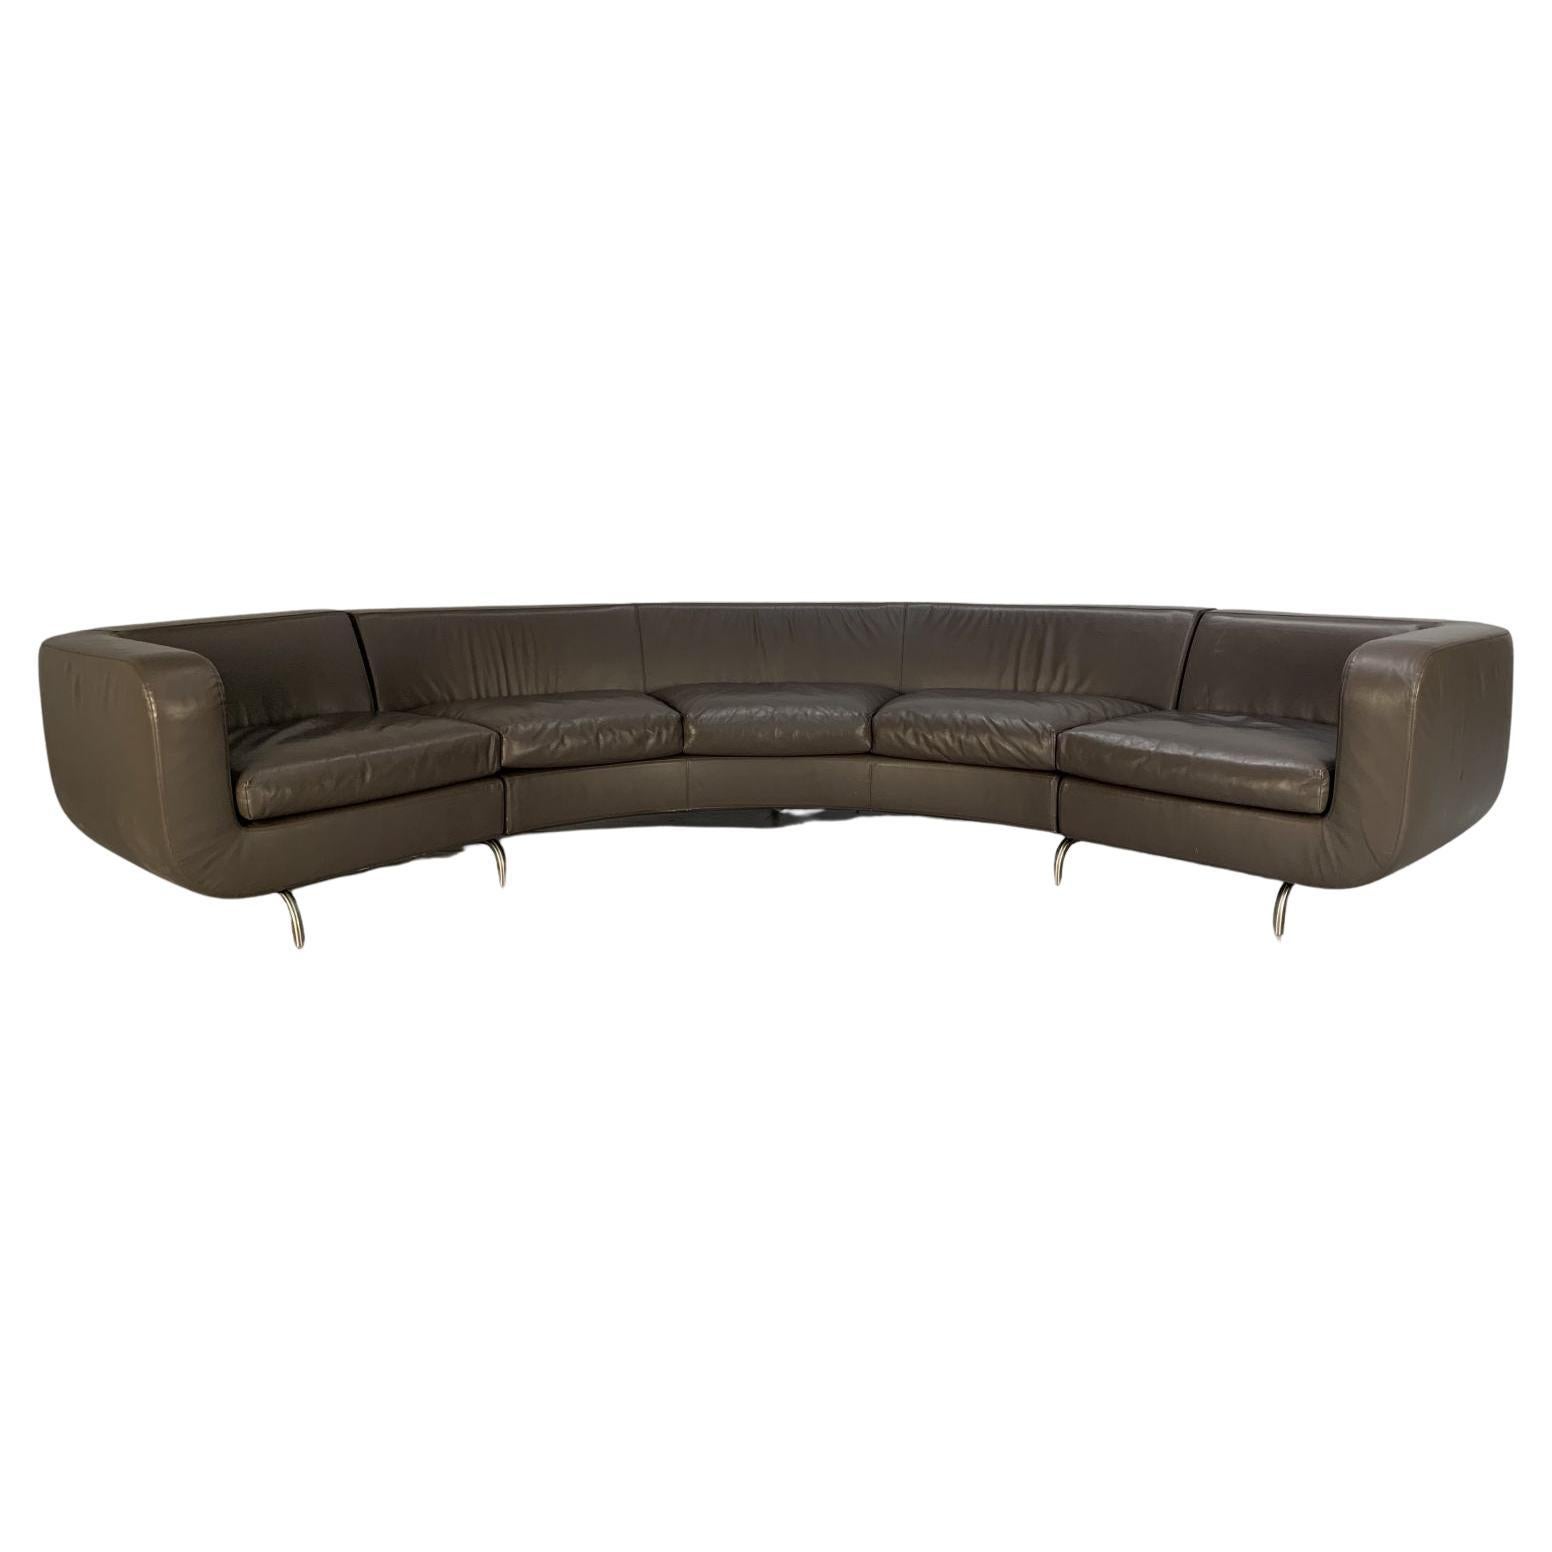 Rare Minotti “Dubuffet” Curved Sofa – in Dark Grey “Pelle” Leather For Sale